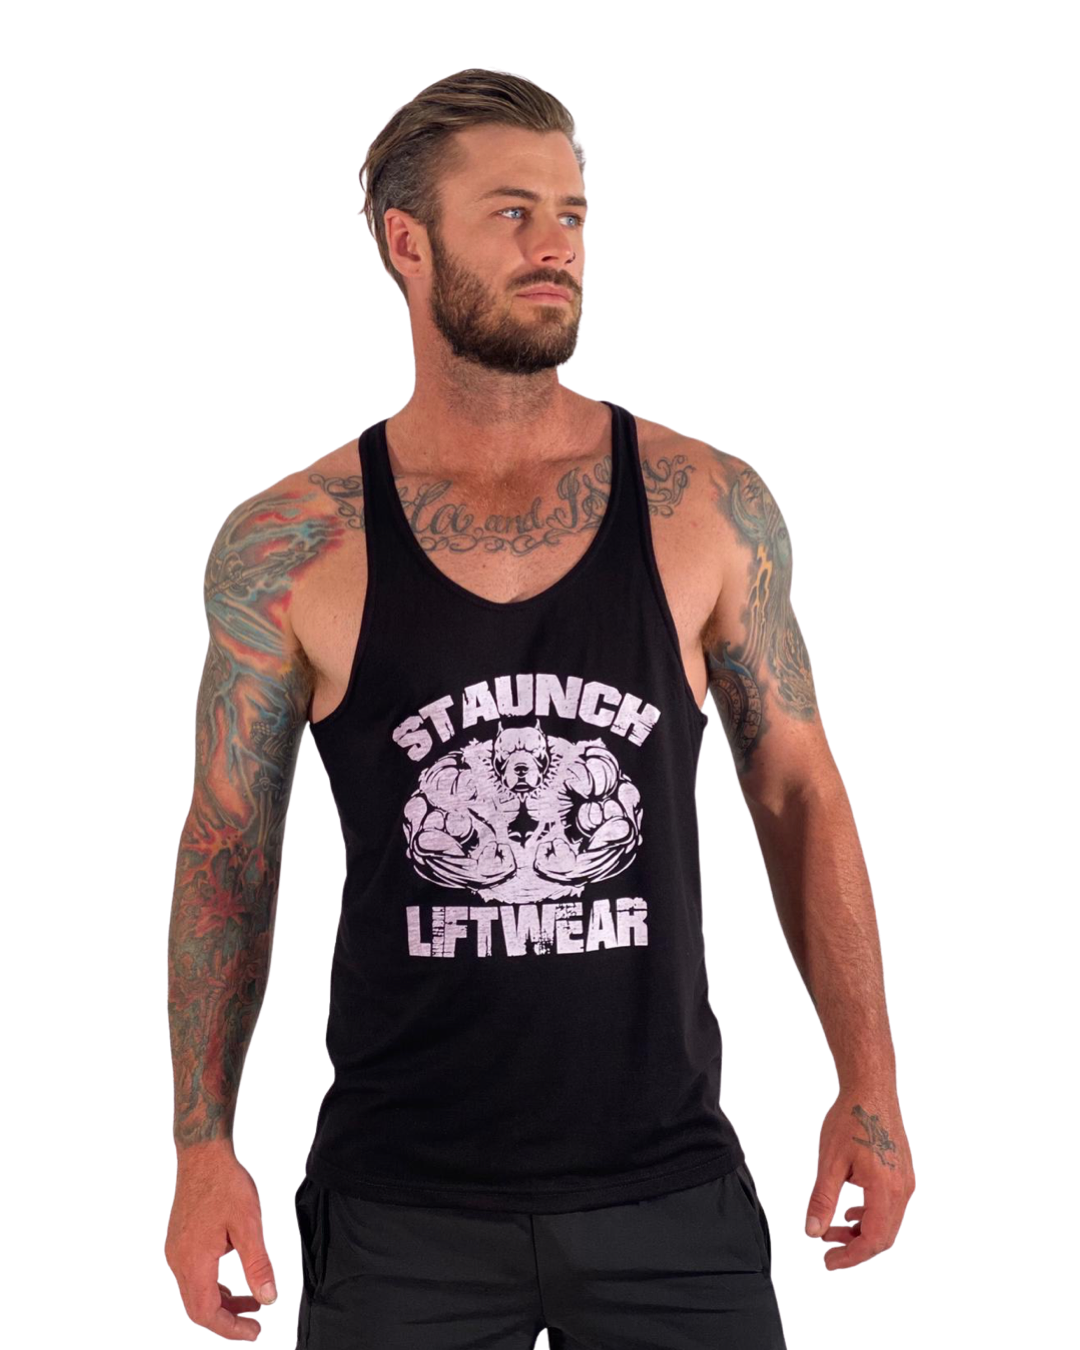 Clothing - Staunch Liftwear